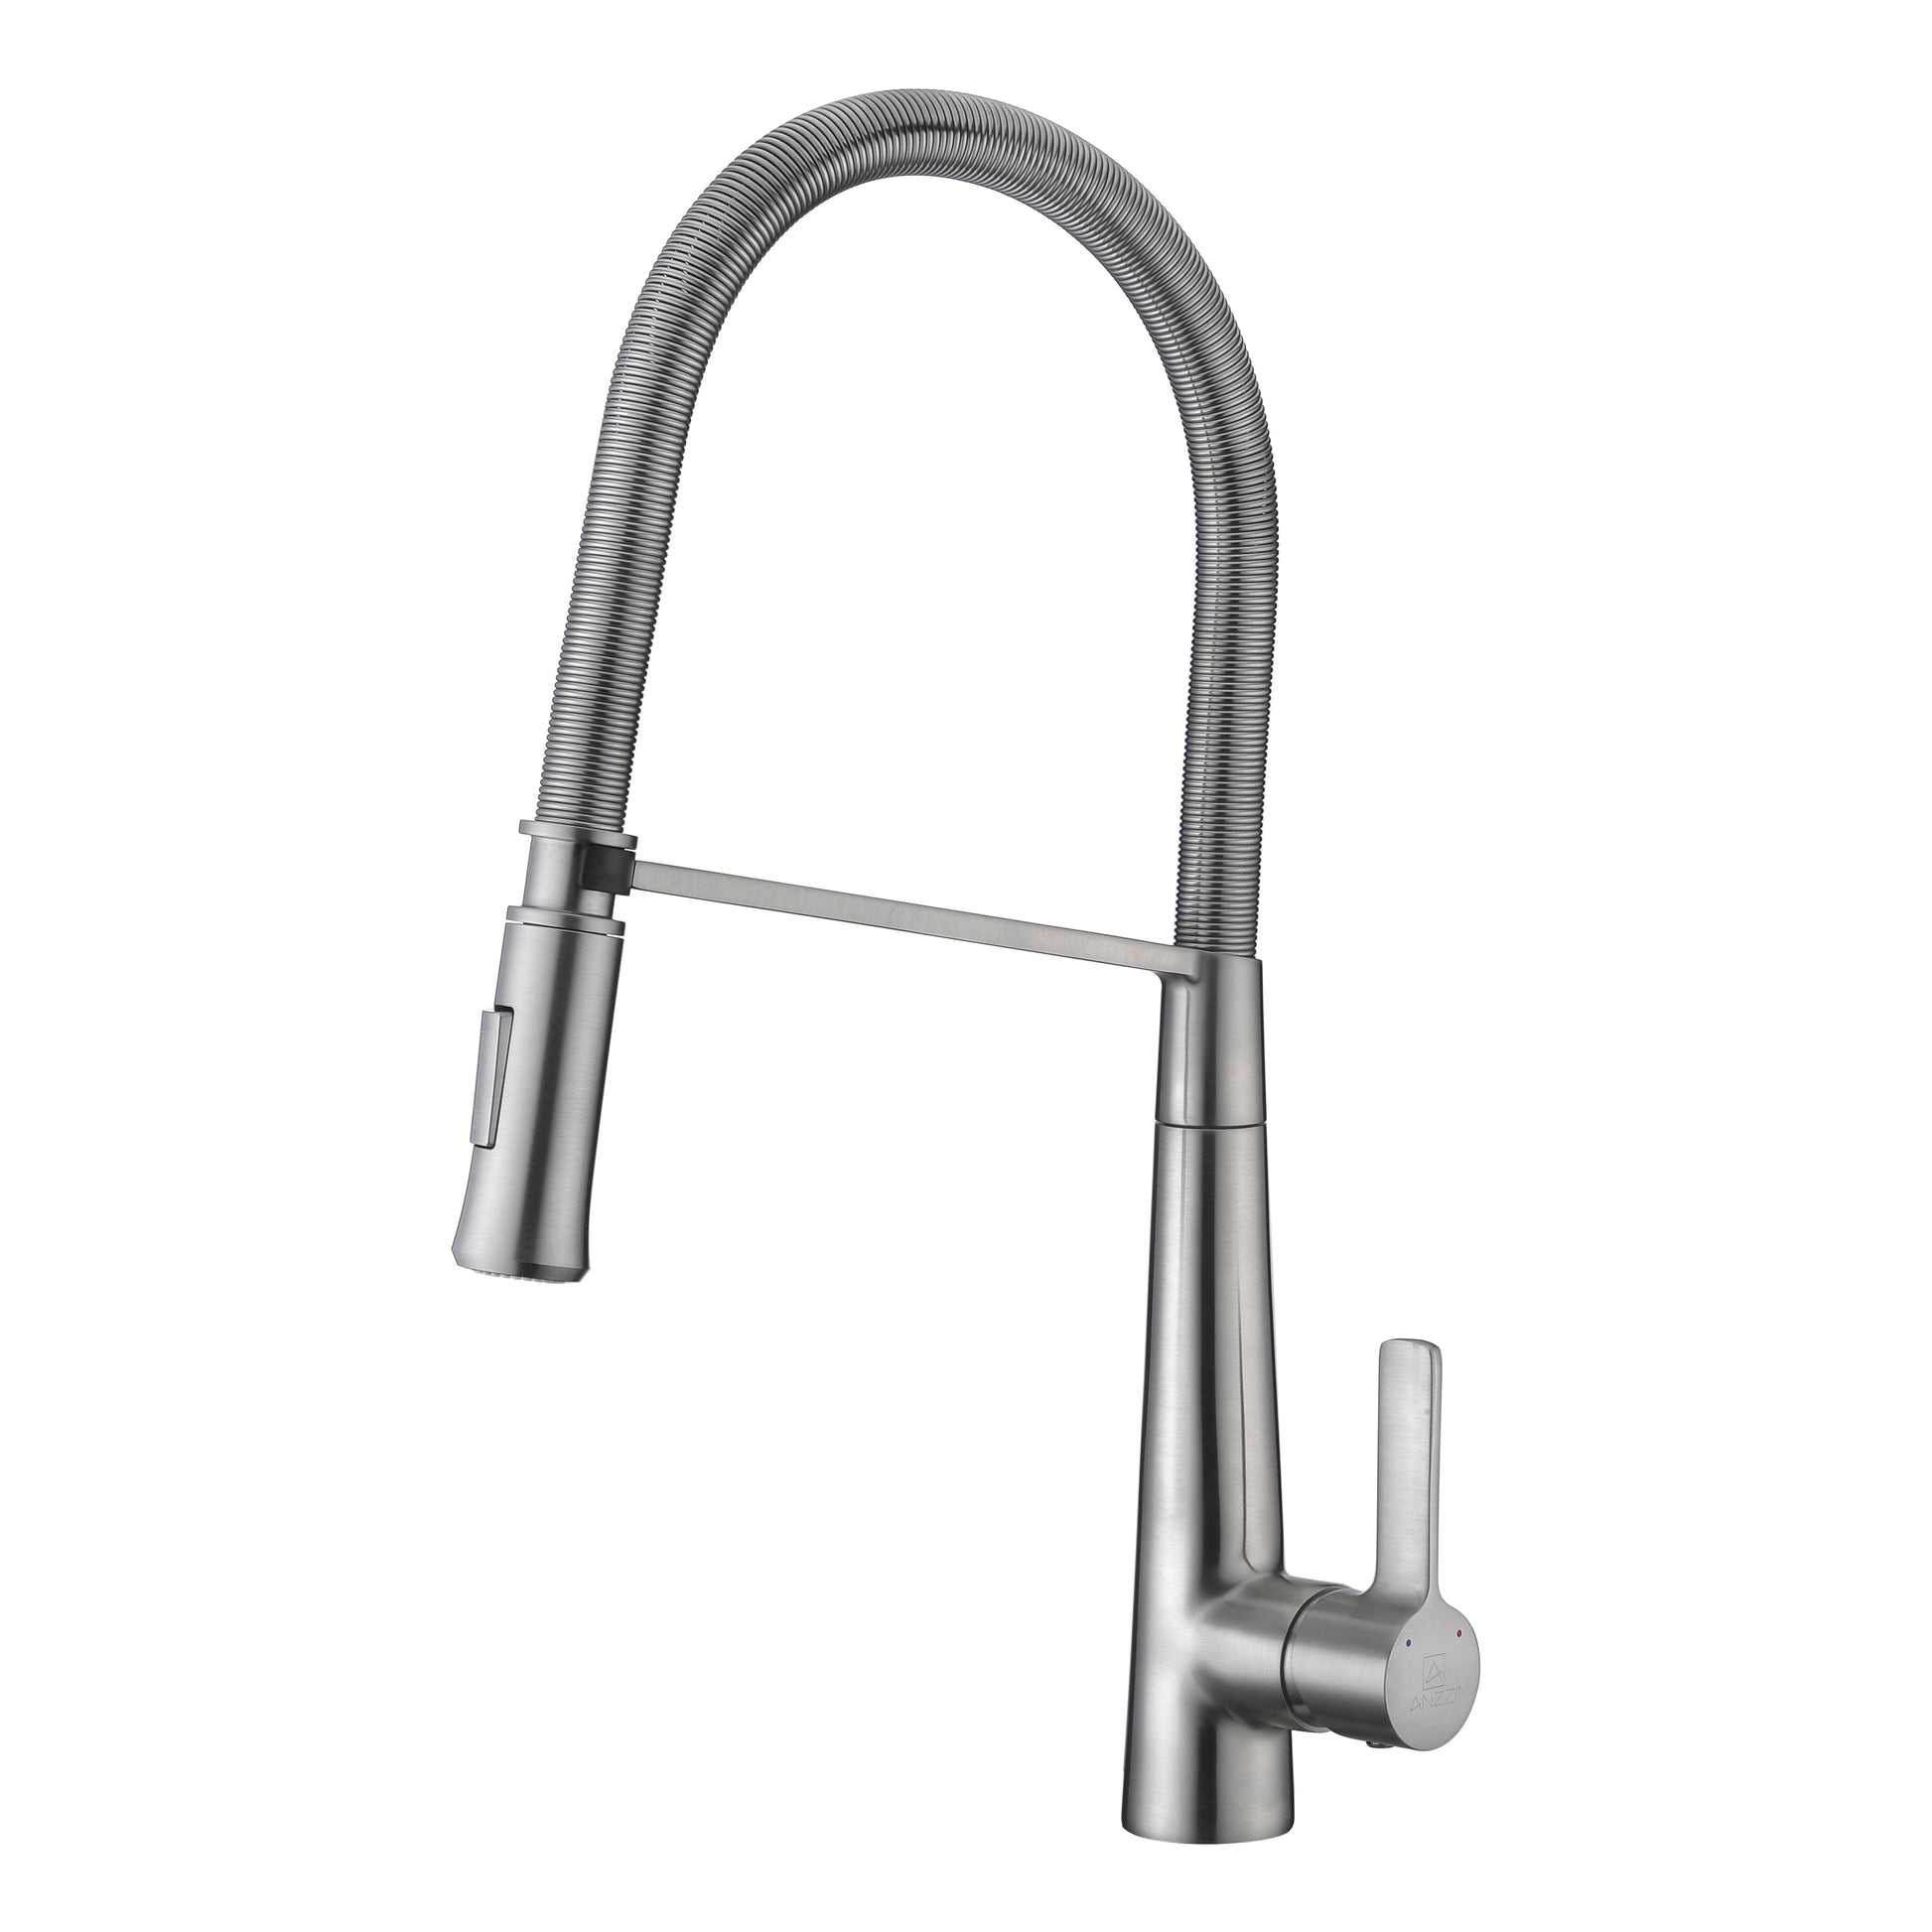 ANZZI Apollo Series Single Hole Brushed Nickel Kitchen Faucet With Euro-Grip Pull Down Sprayer